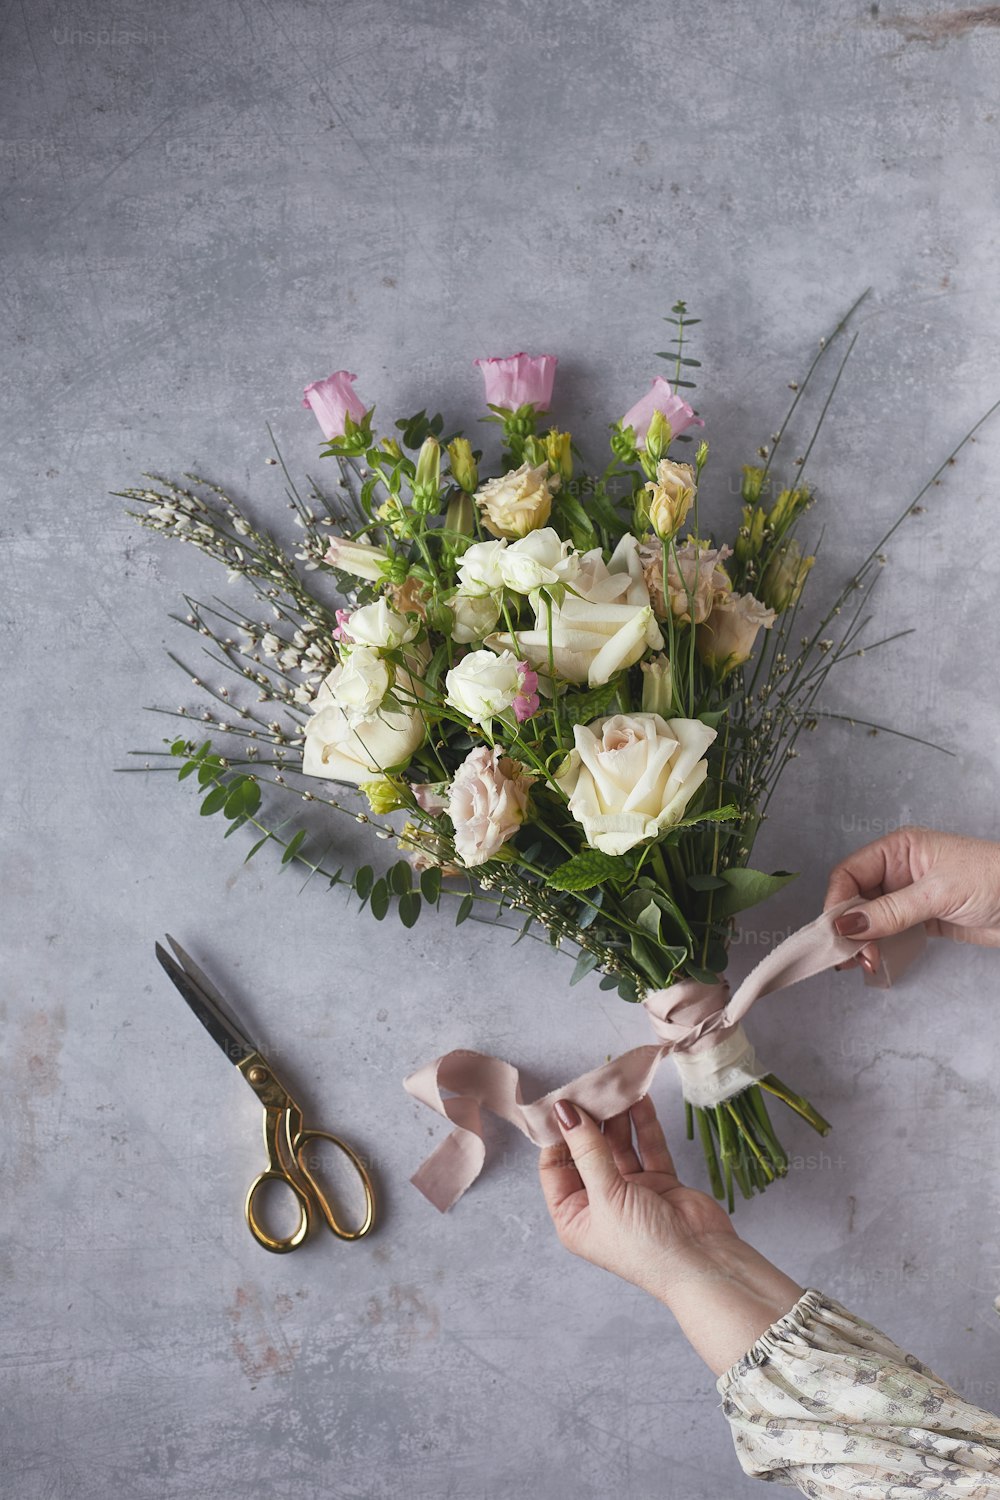 a person cutting up flowers with scissors on a table